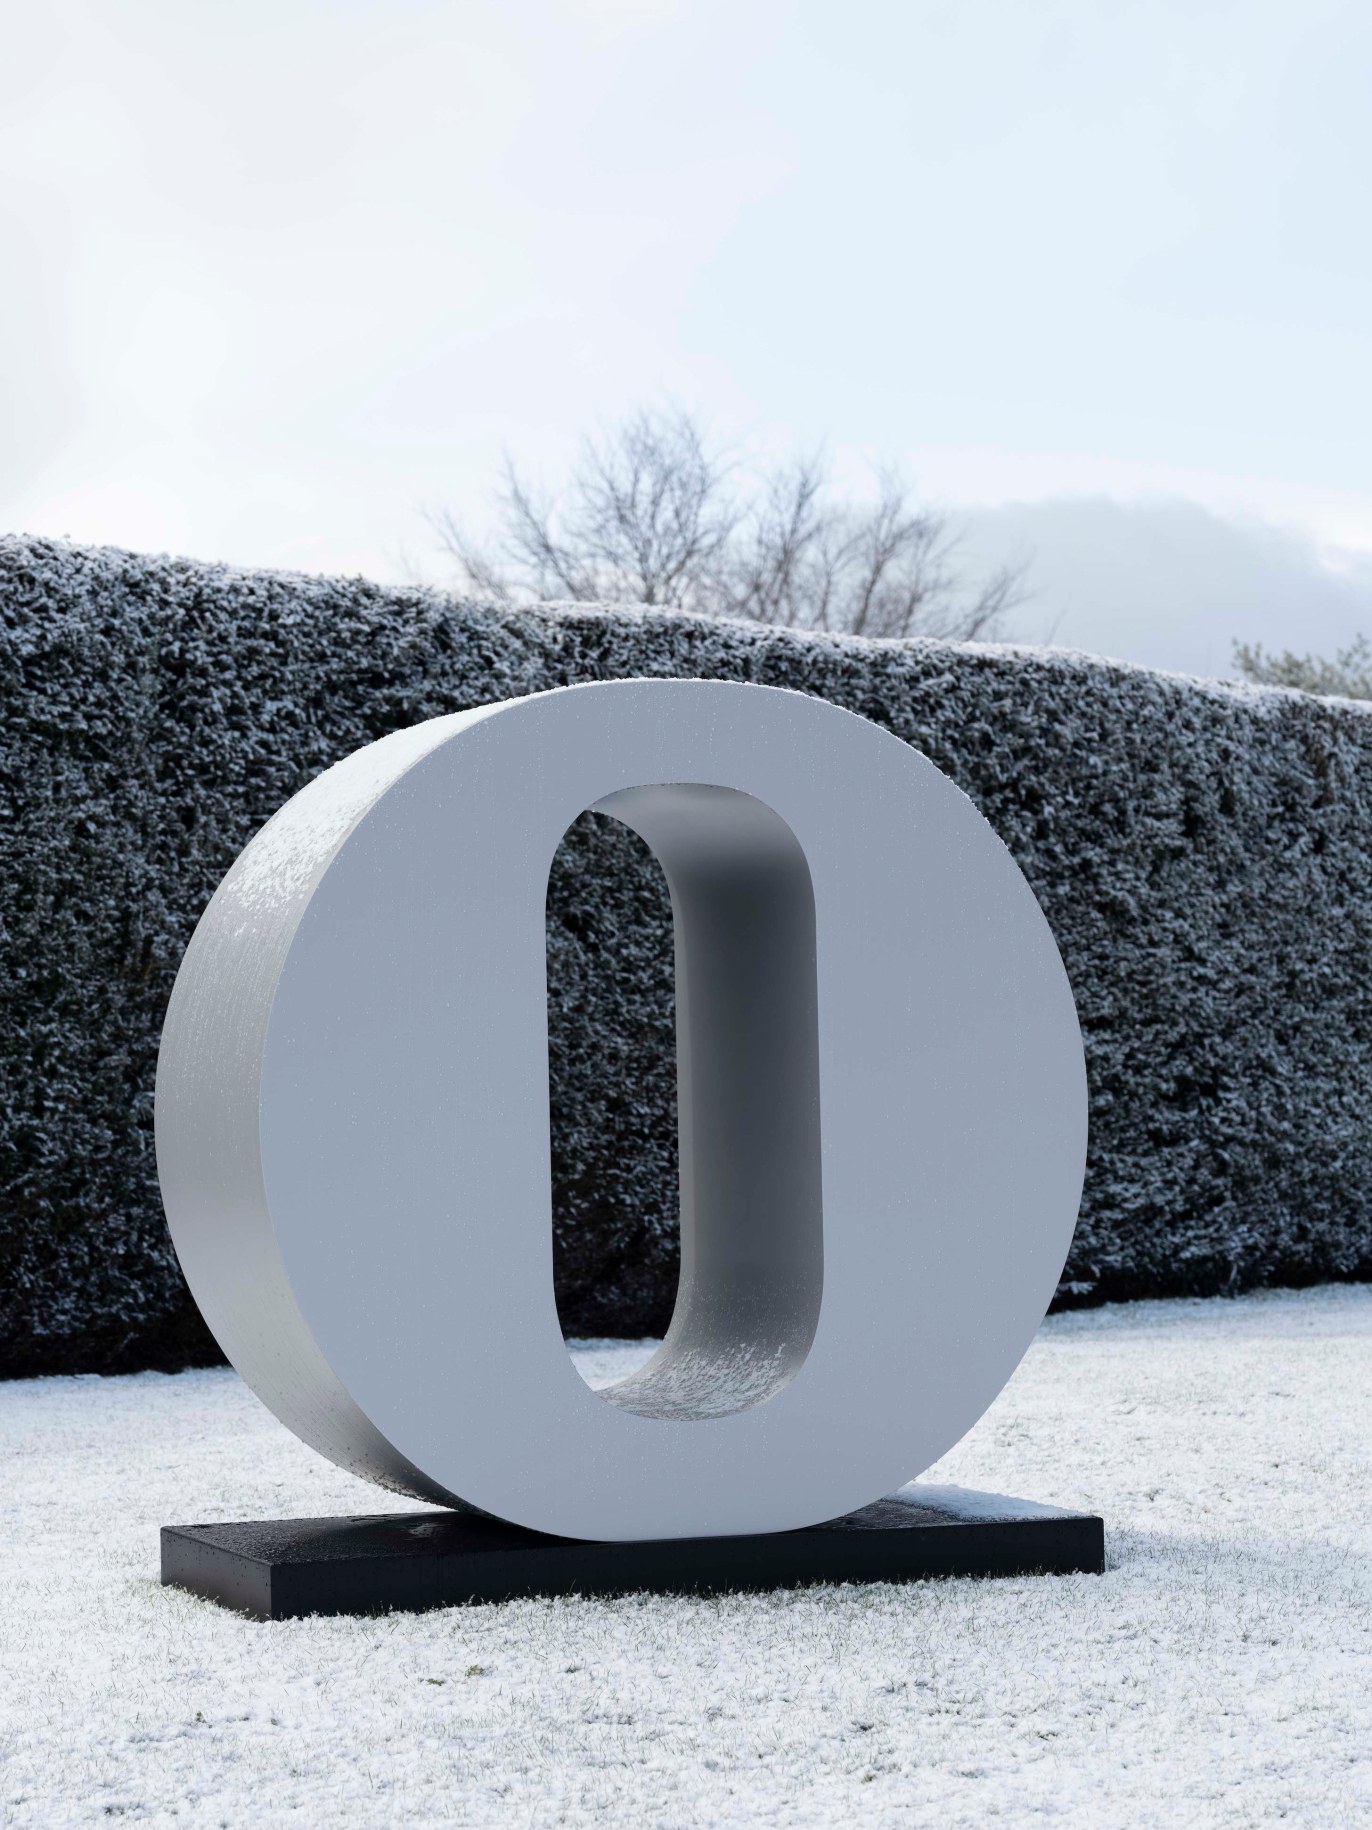 Installation view in snow of Indiana's gray polychrome aluminum sculpture ZERO at the Yorkshire Sculpture Park